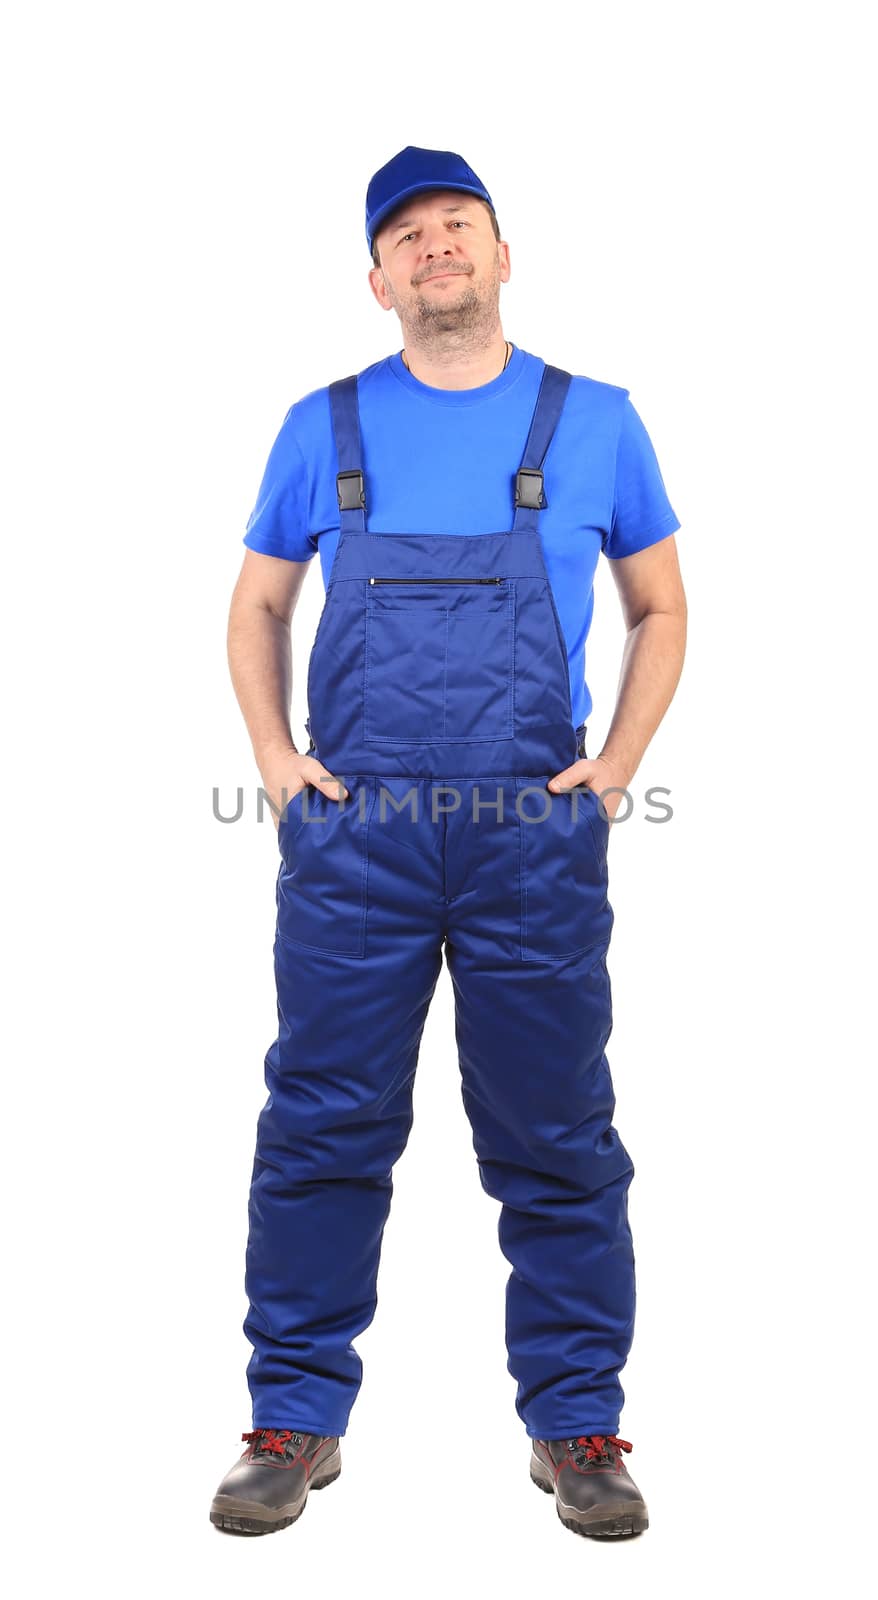 Worker with arms in pockets. Isolated on a white background.